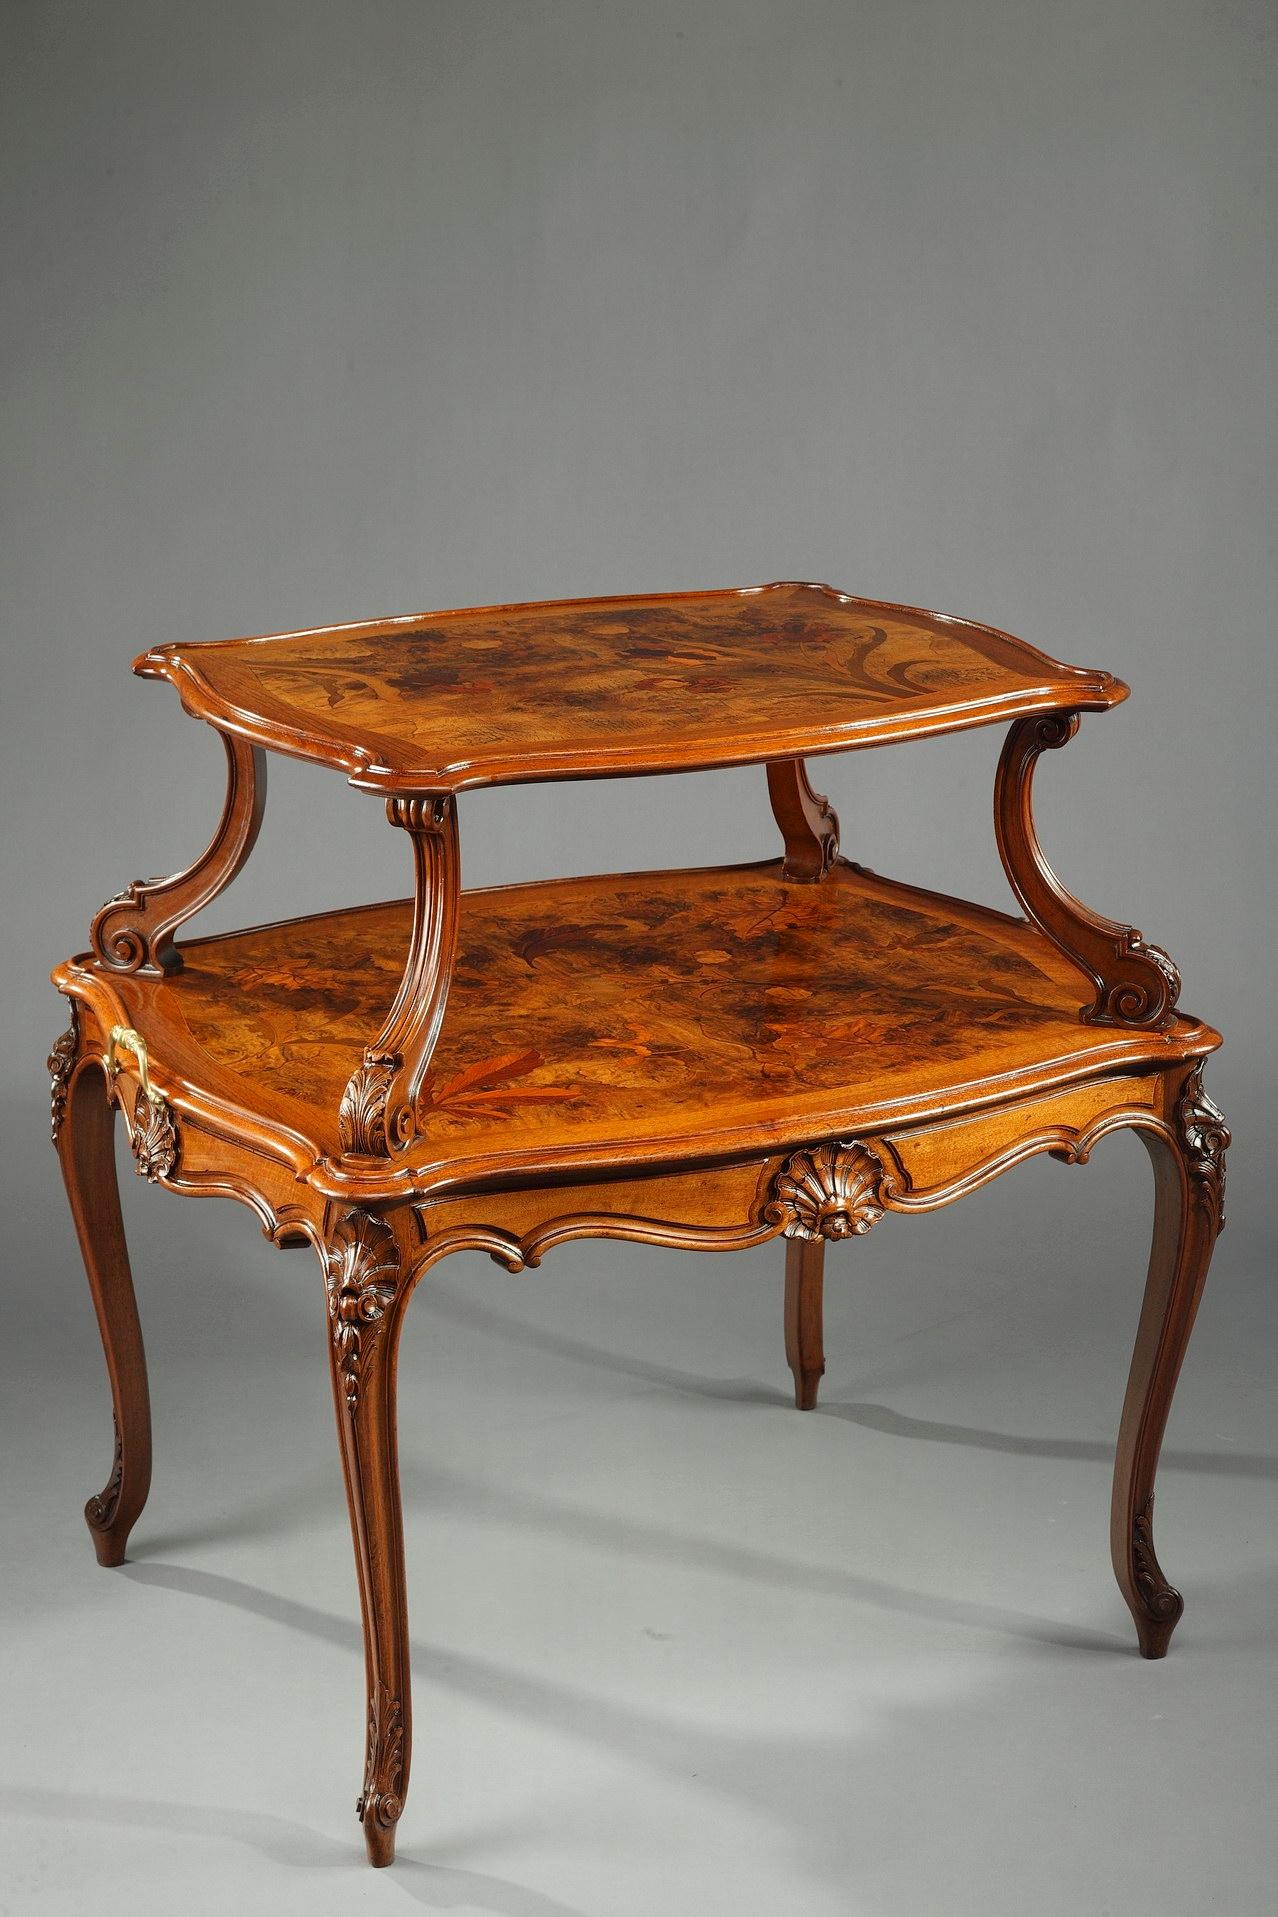 Wooden Tea Table with Polychrome Marquetry Decoration, Art Nouveau Period 3